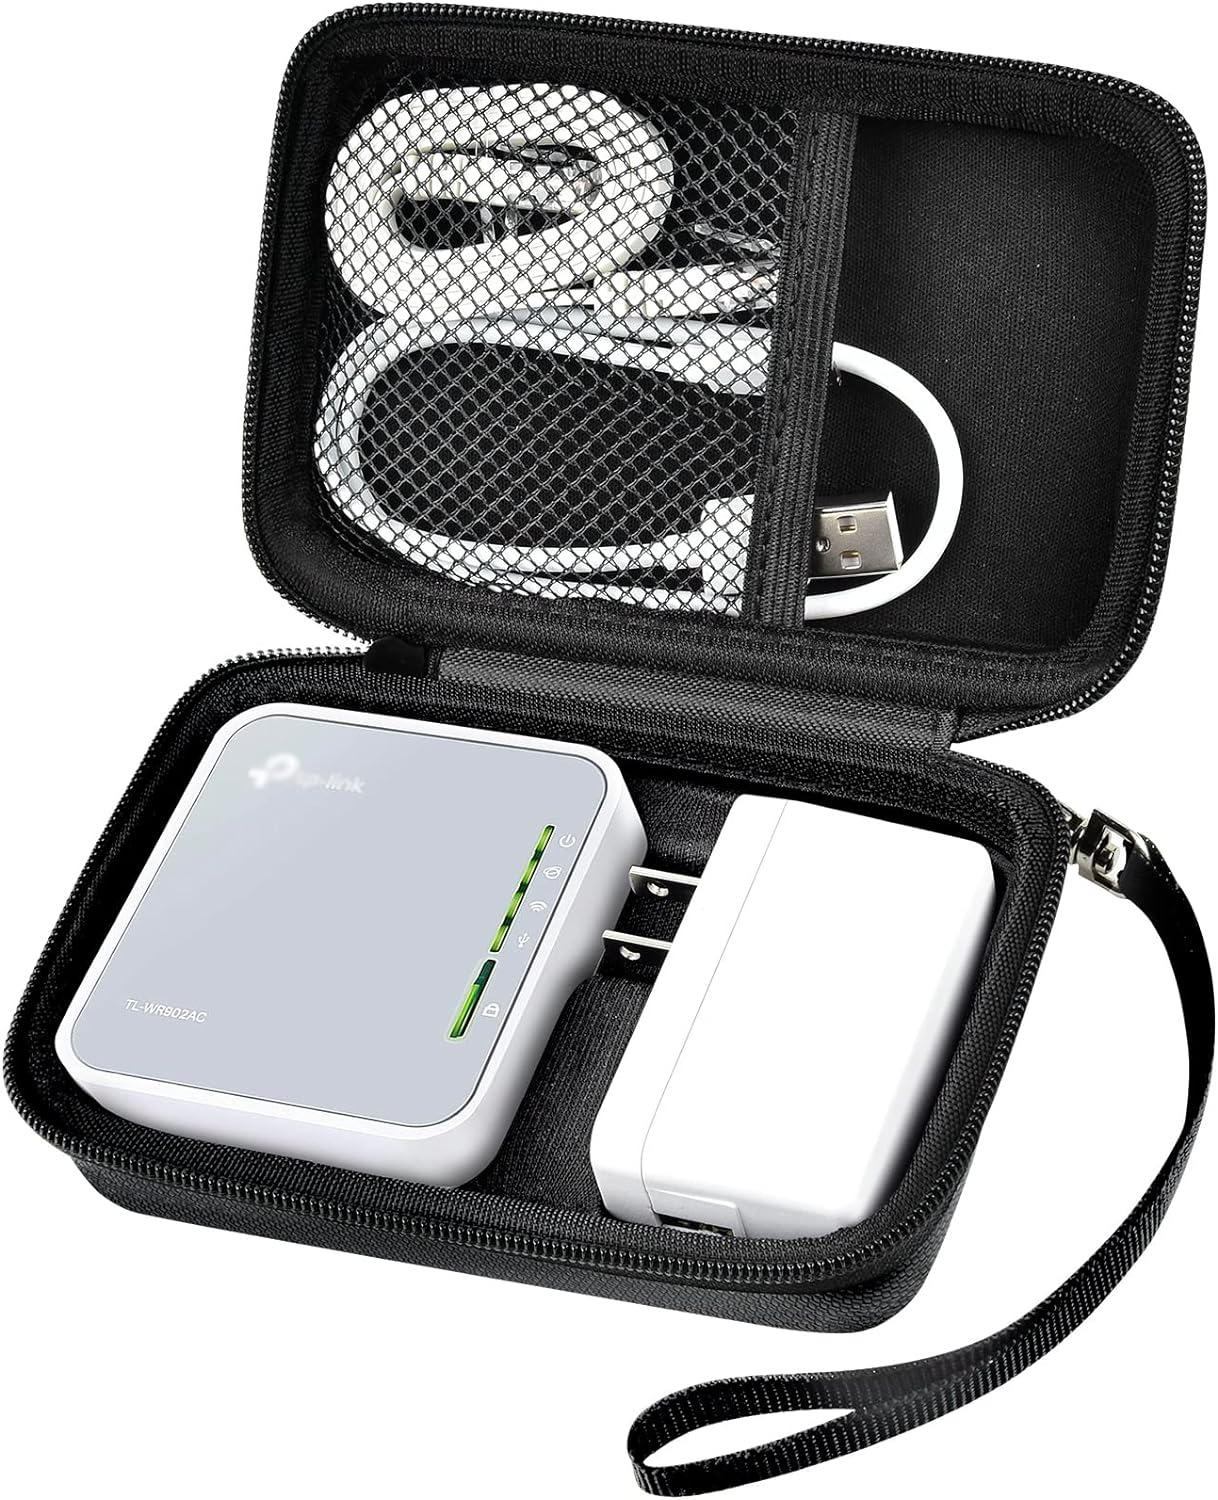 Case Compatible with Tp-Link AC750 Wireless Portable Nano Travel Router. for Hot